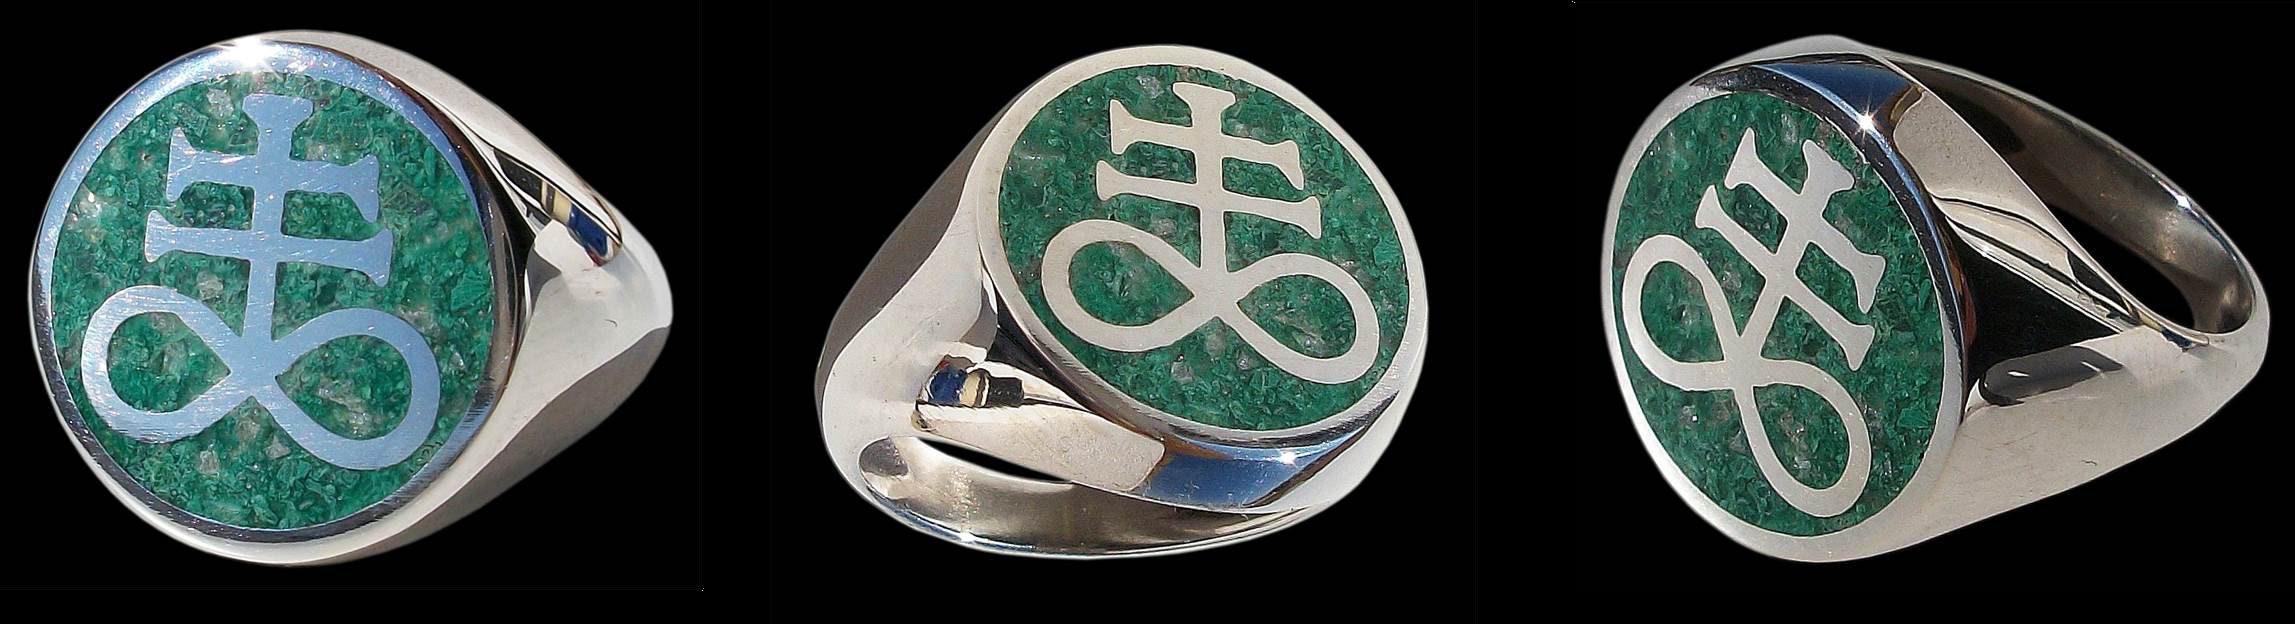 Brimstone ring - Sterling Silver Brimstone Ring -  ALL SIZES - Leviathan Cross with crushed quartz malachite